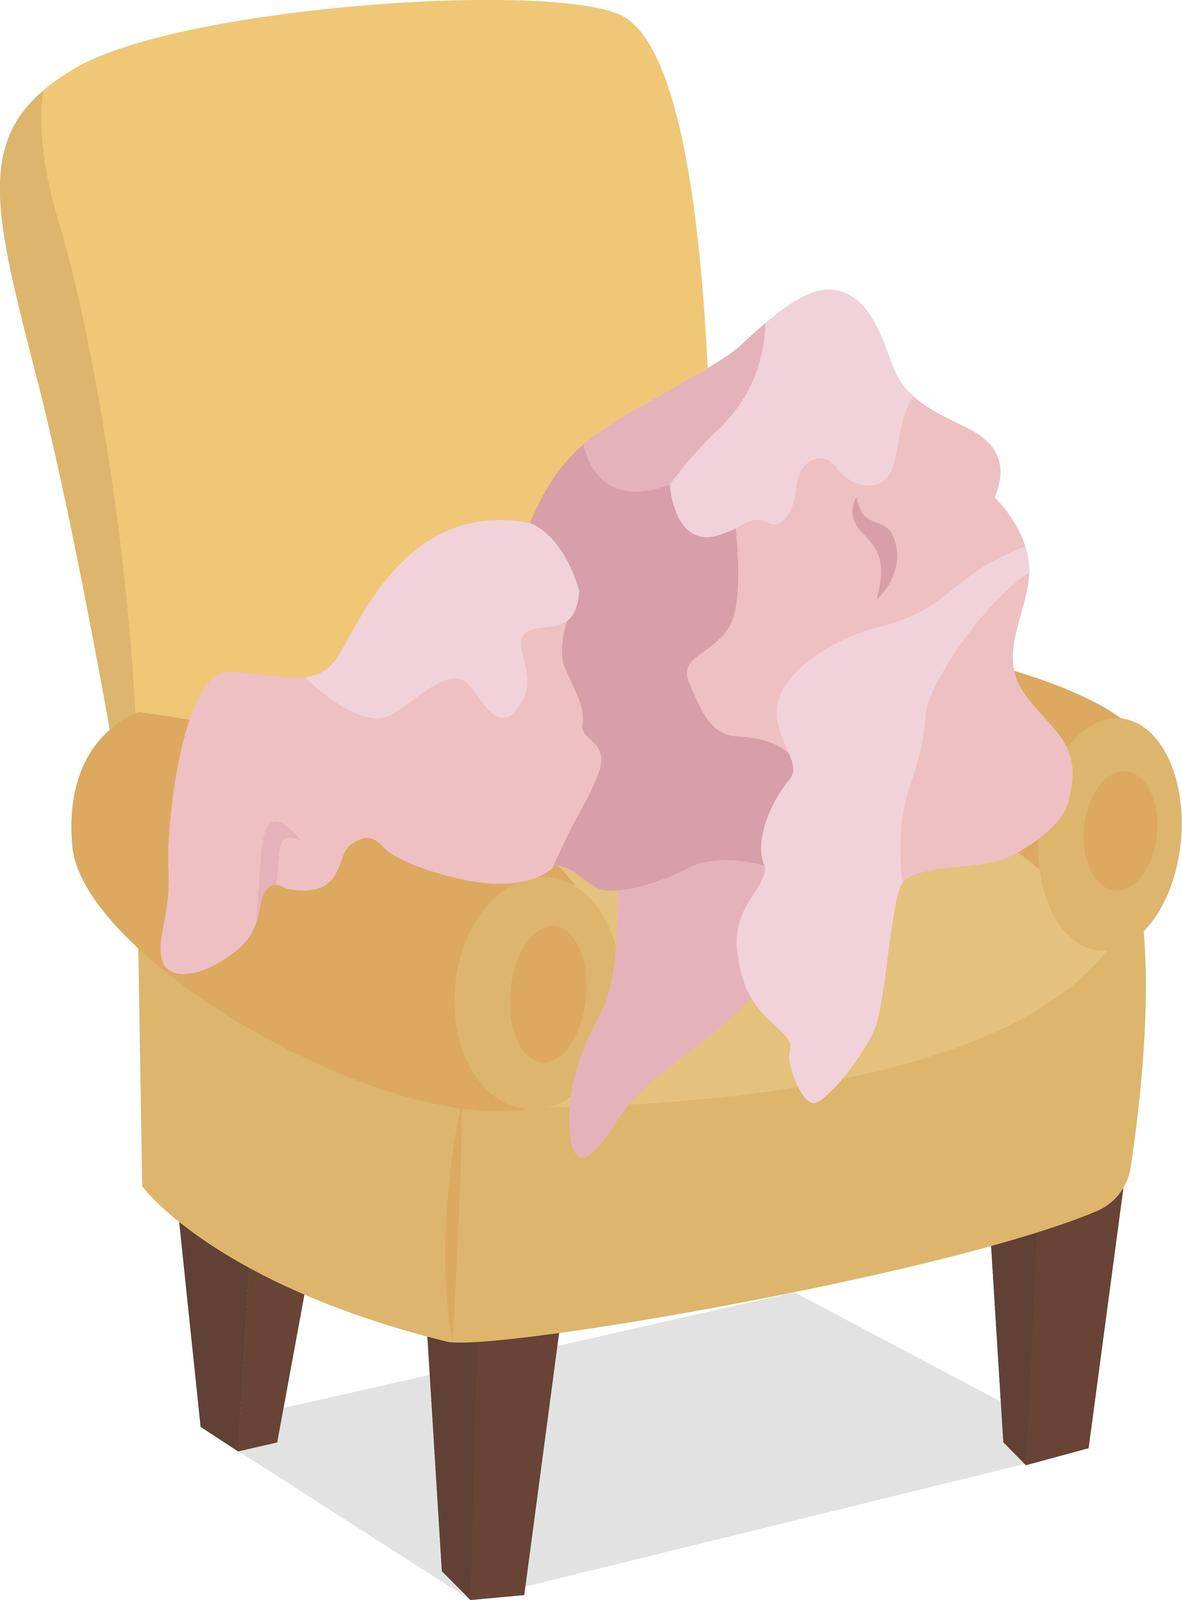 Leaving dirty clothes on armchair semi flat color vector object by ntl